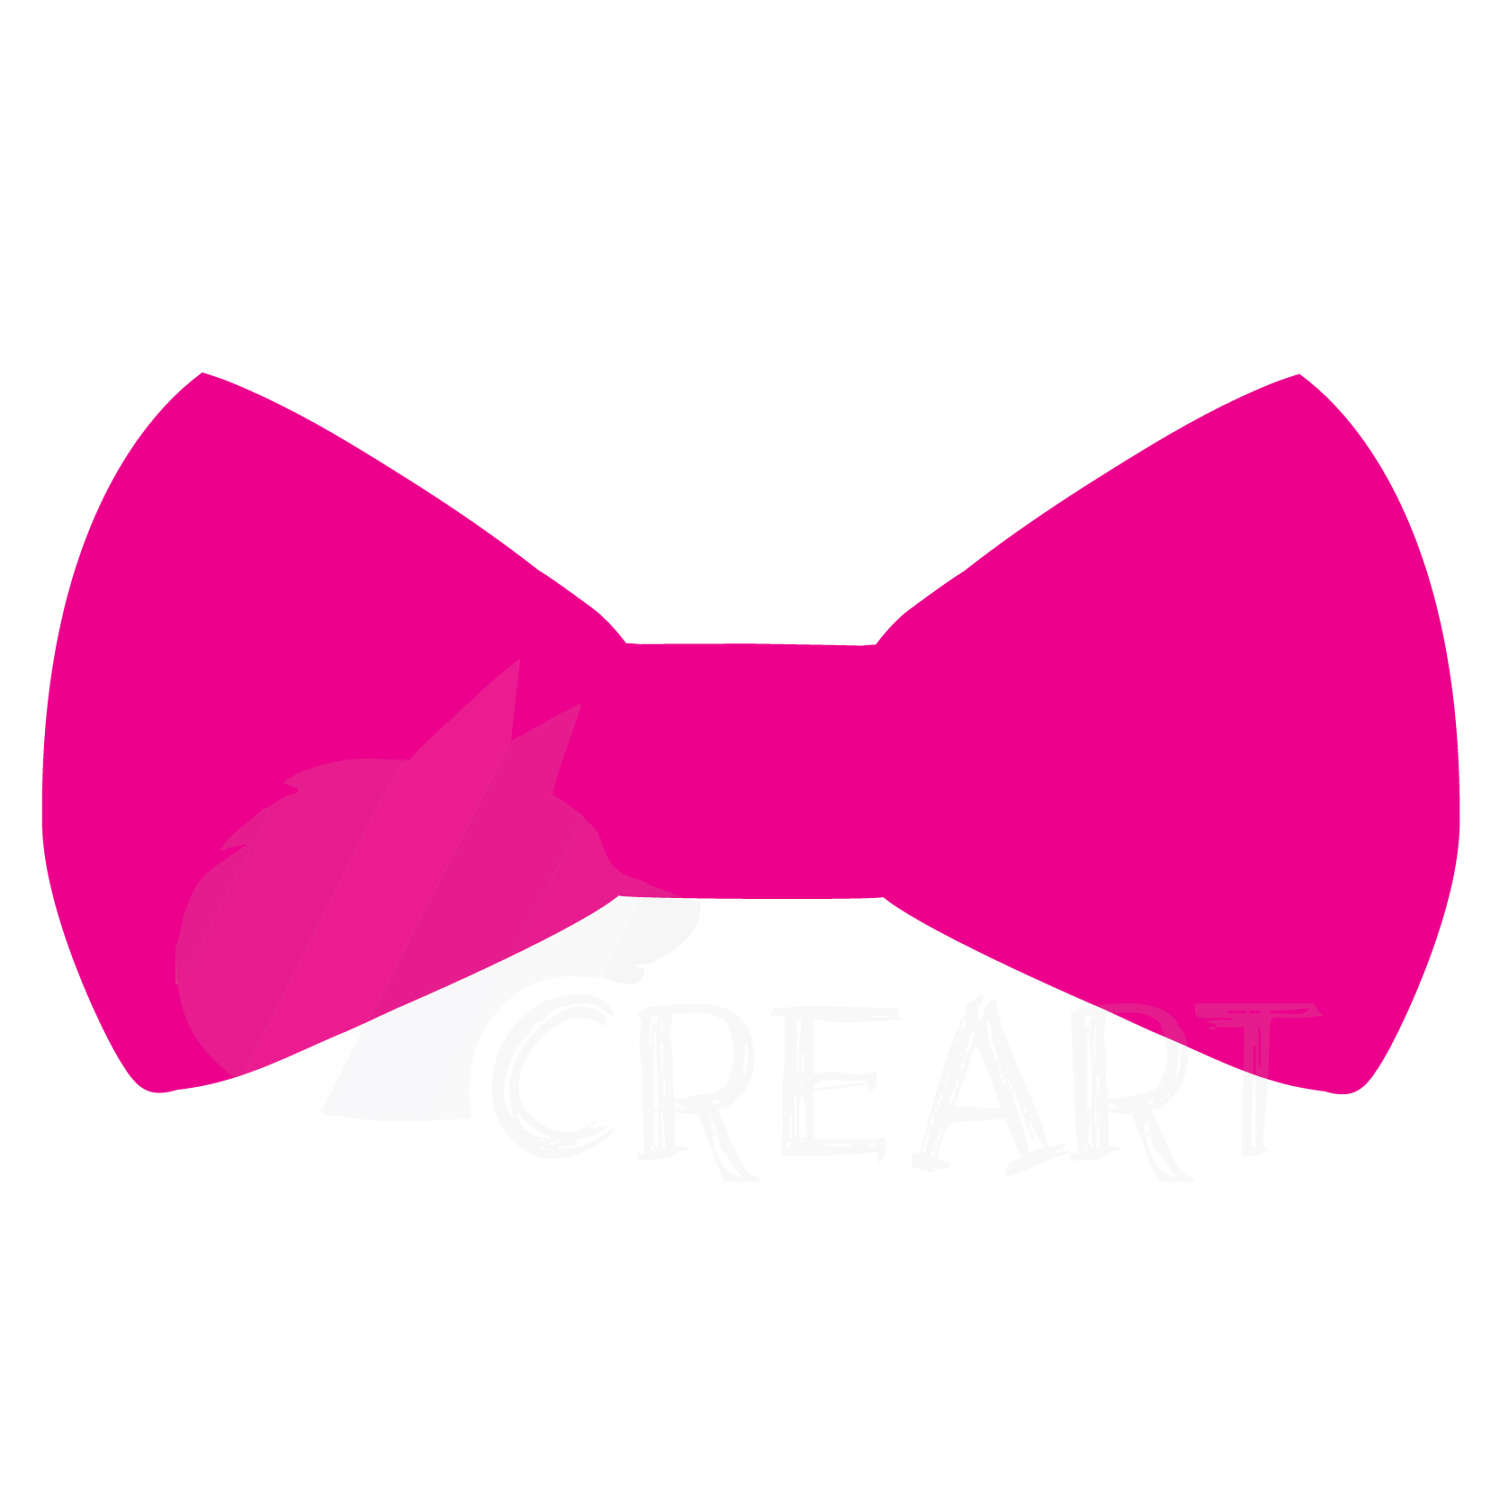 Hipster clip art instant. Bows clipart bow tie